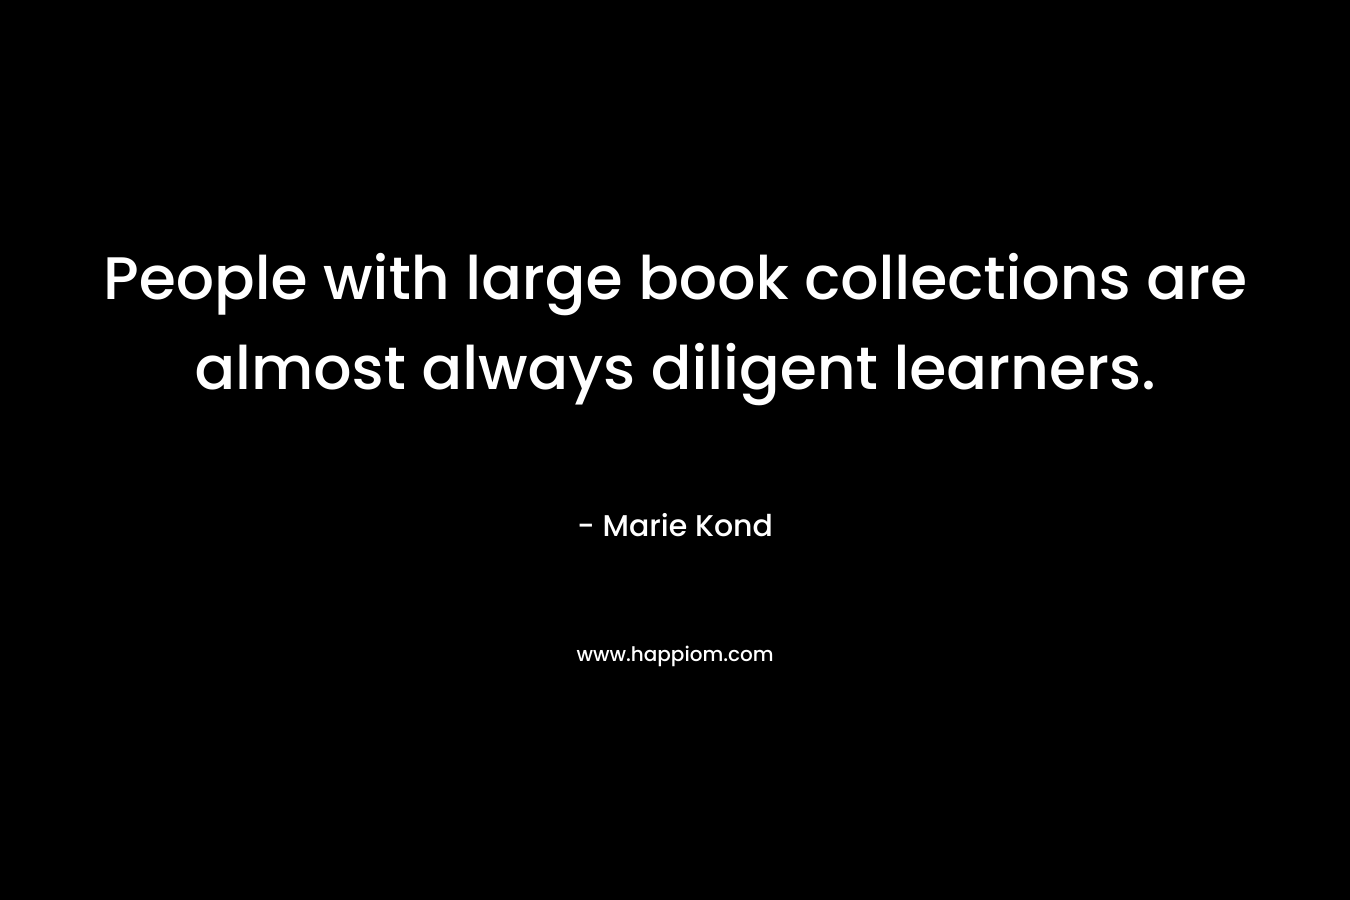 People with large book collections are almost always diligent learners. – Marie Kond